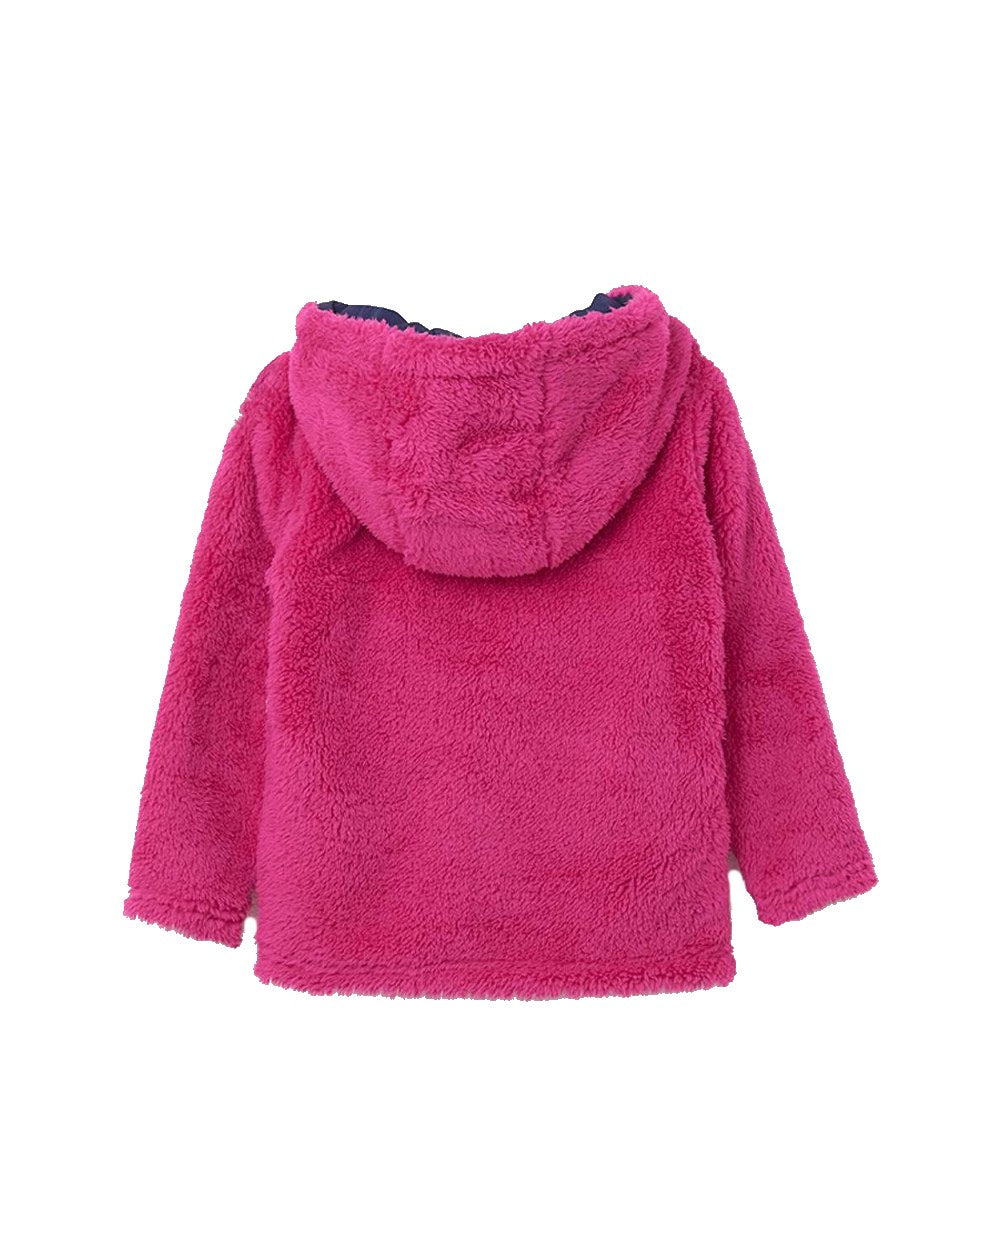 Lighthouse Gracie Girls Fleece in Bright Pink 